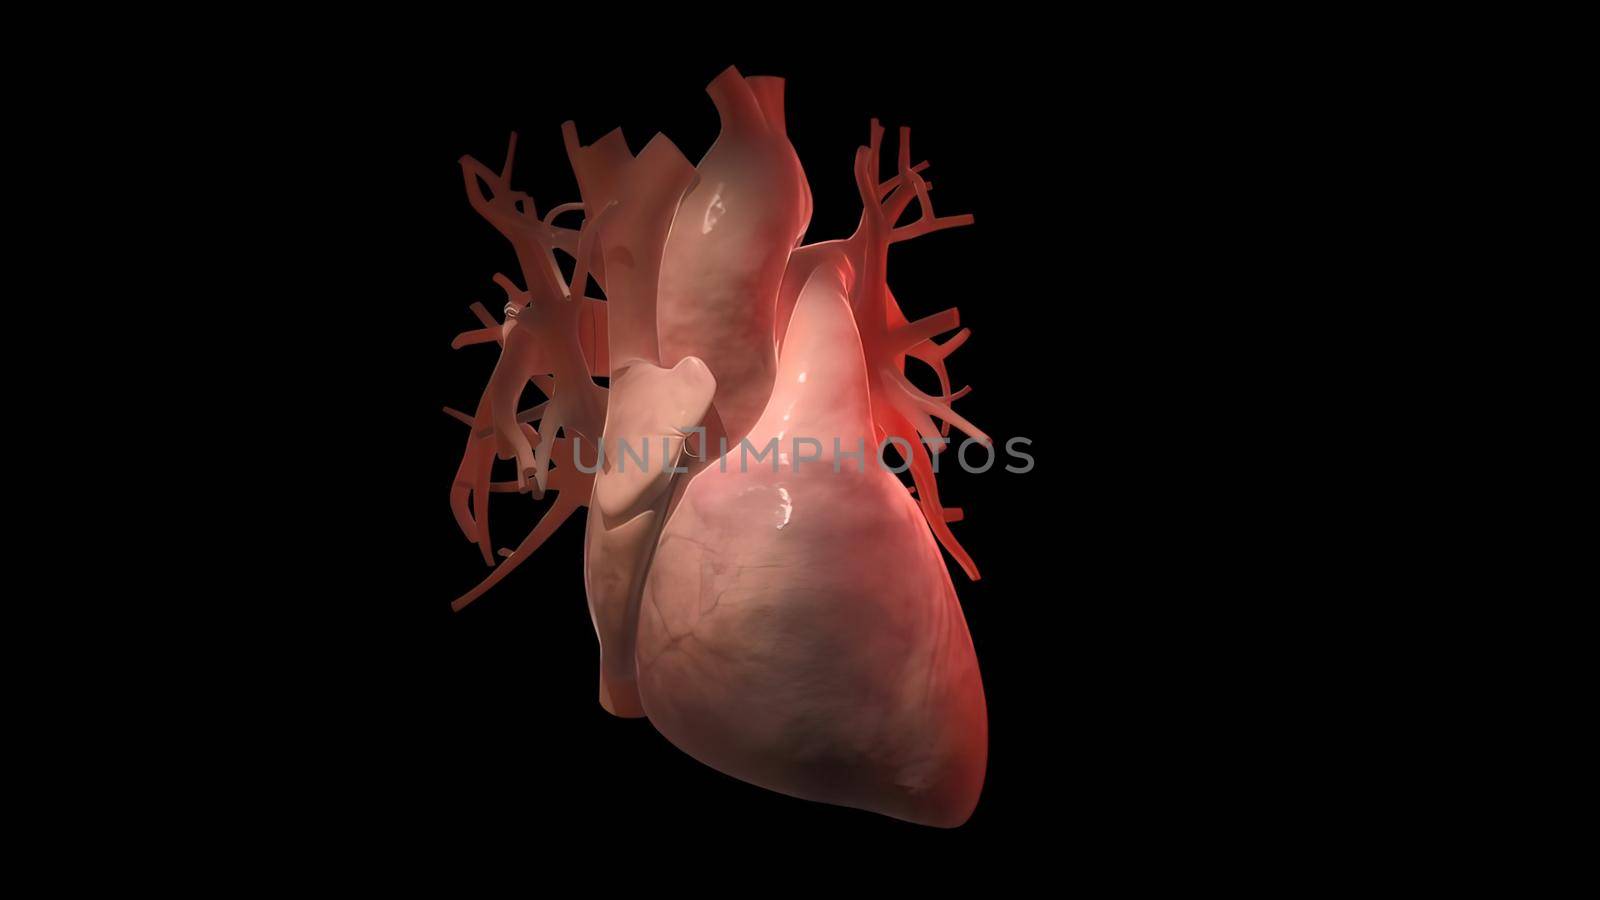 Cardiovascular system with beating heart by creativepic